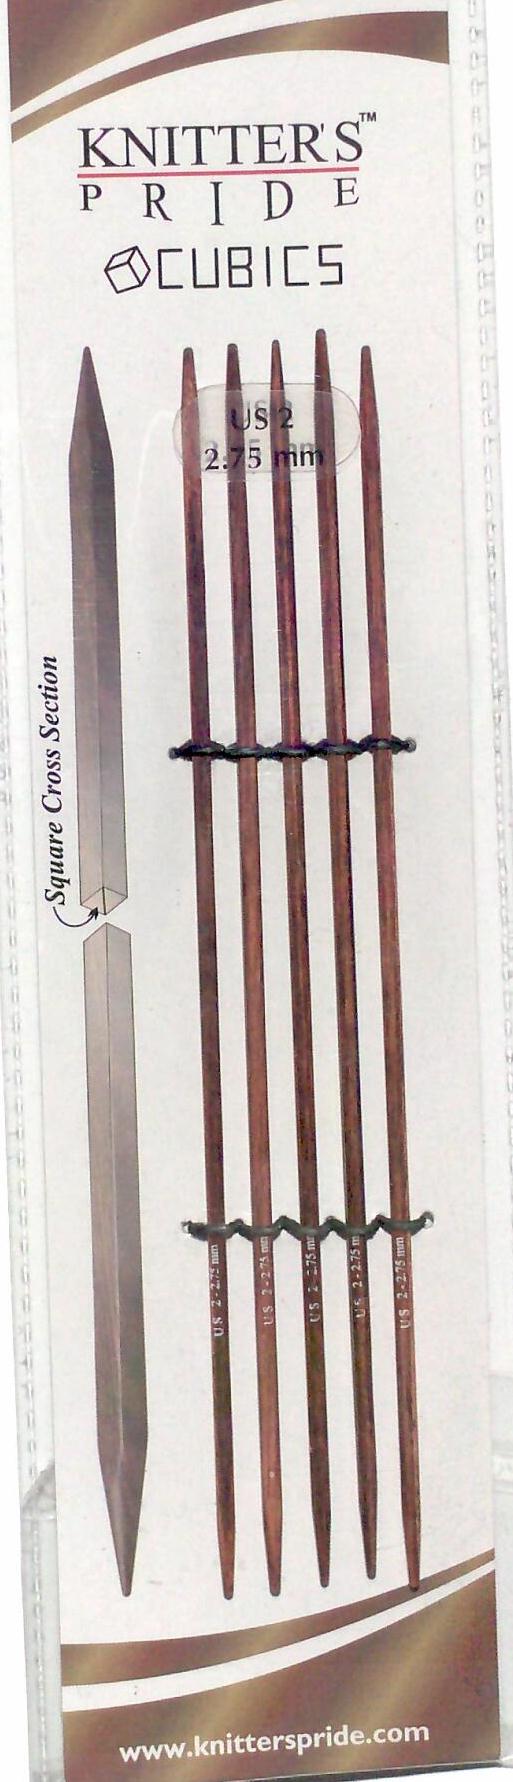 Knitter's Pride 06"/15 cm 3.50 mm/US 4 Rosewood Cubics Double Point Needles